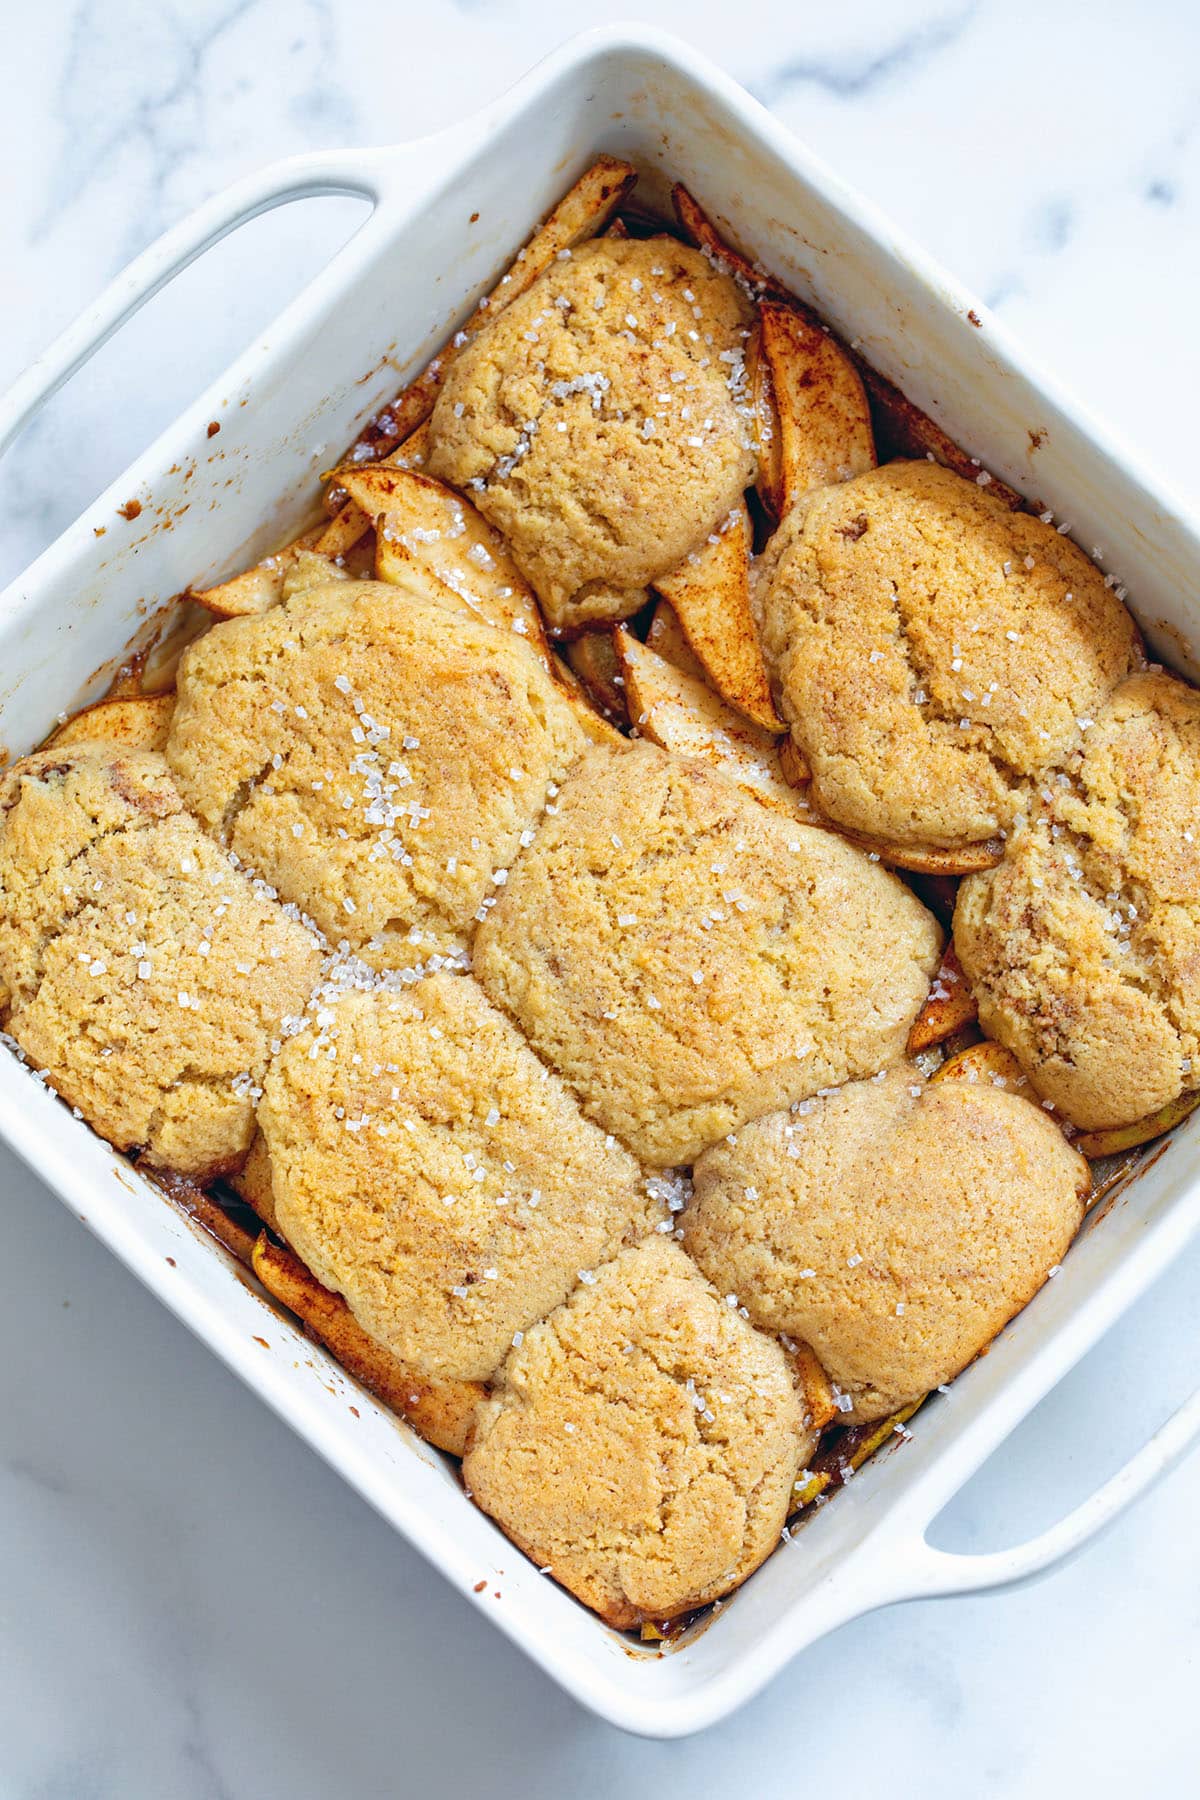 Pear cobbler in baking dish just out of the oven.